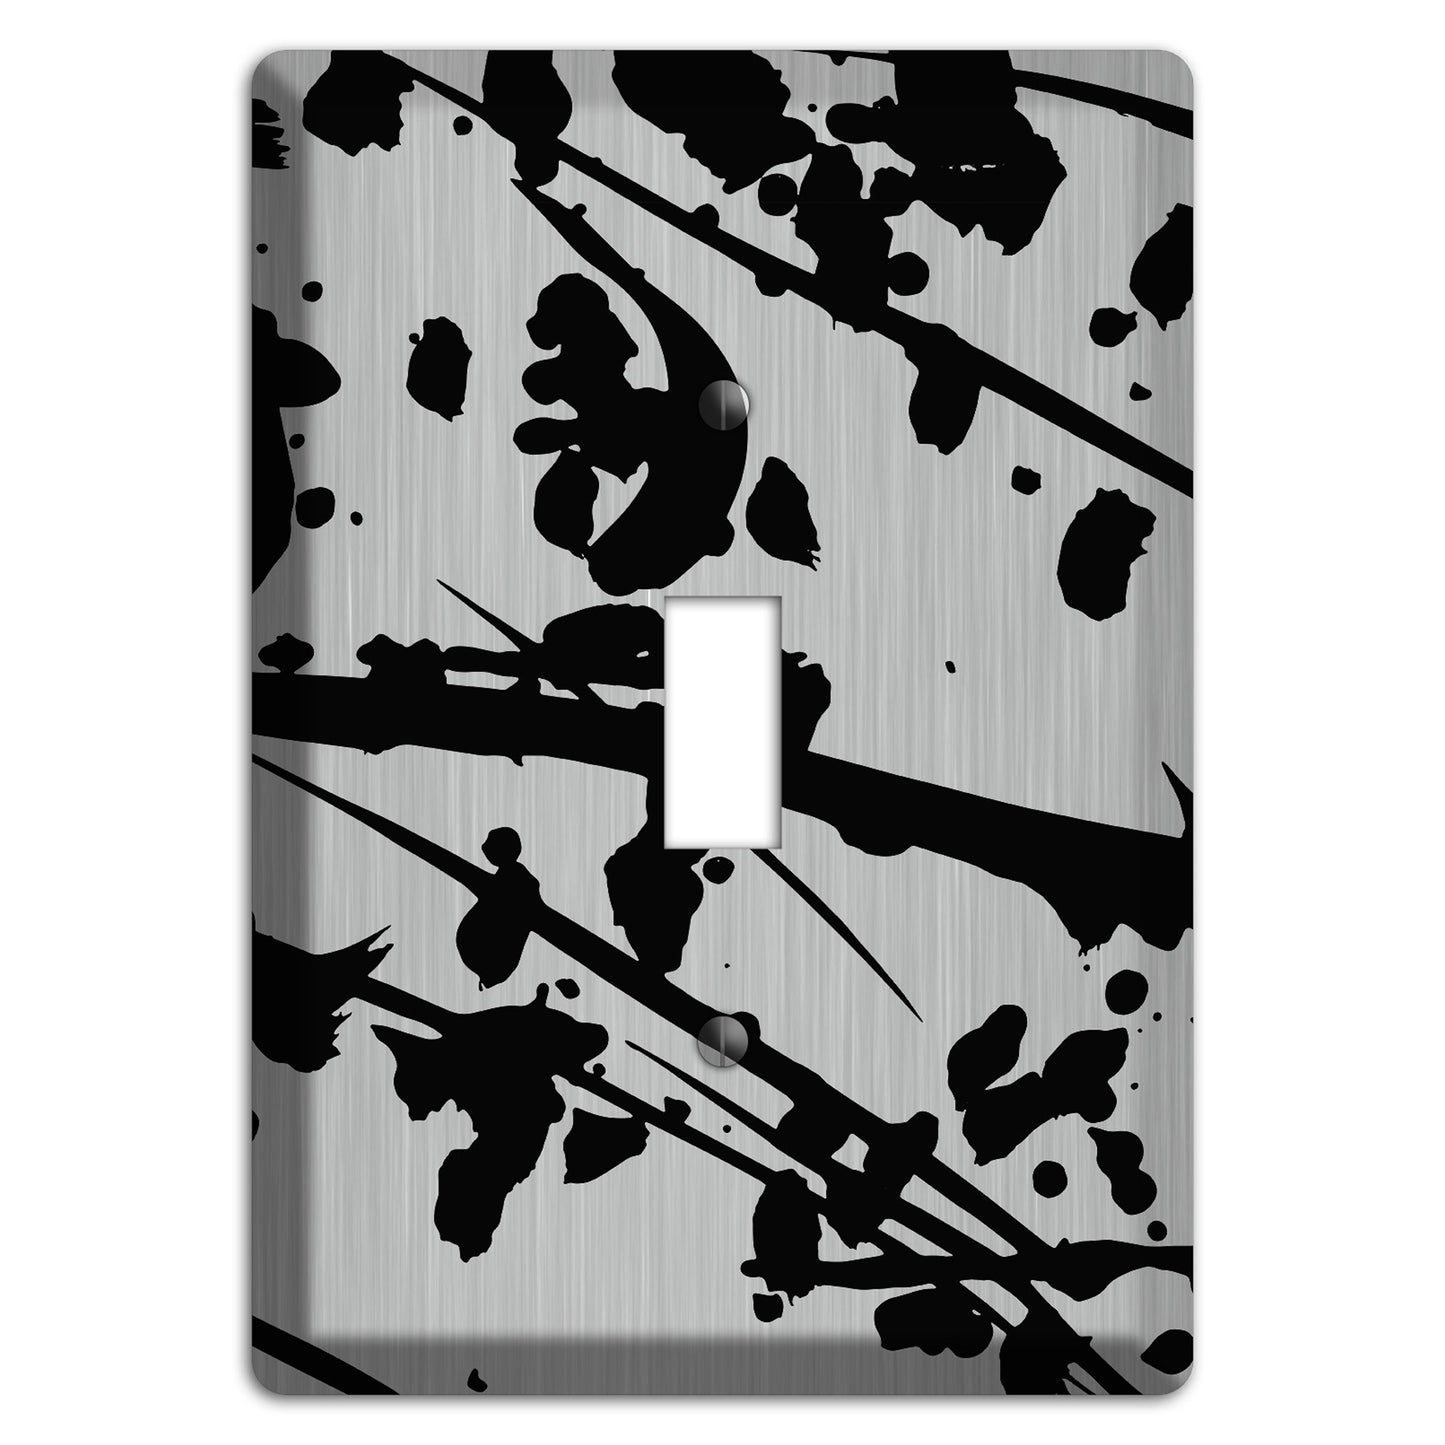 Ink Splash 6 Stainless Cover Plates